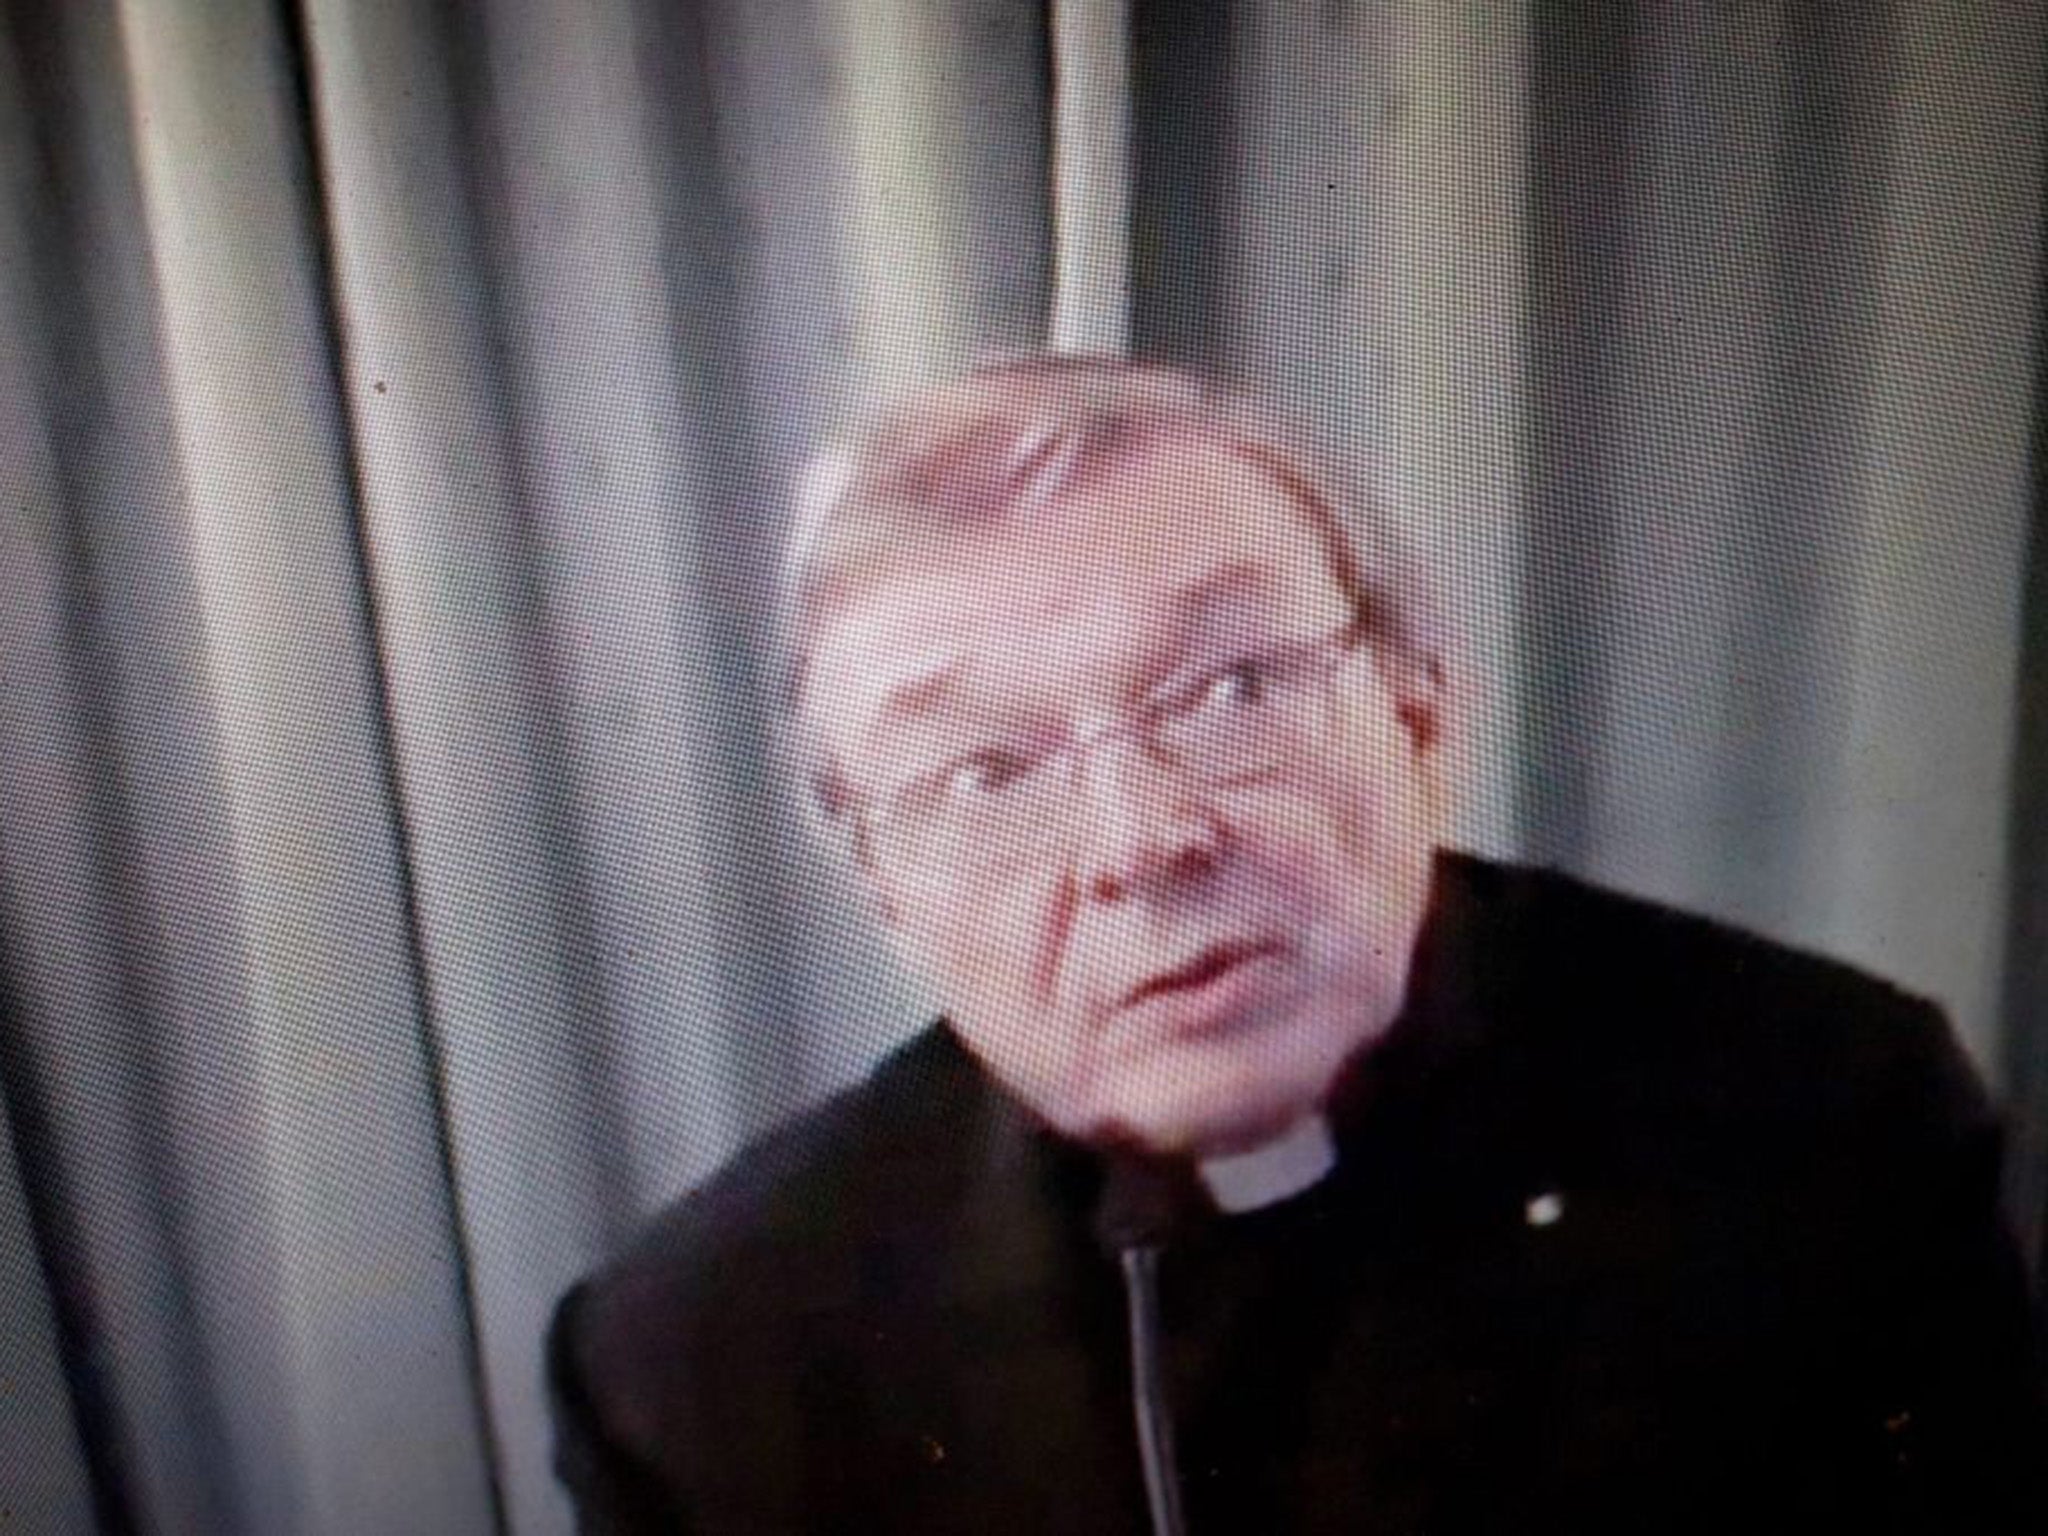 Cardinal George Pell gives evidence to the Royal Commission inquiry into child sex abuse by Catholic priests via videolink from Rome